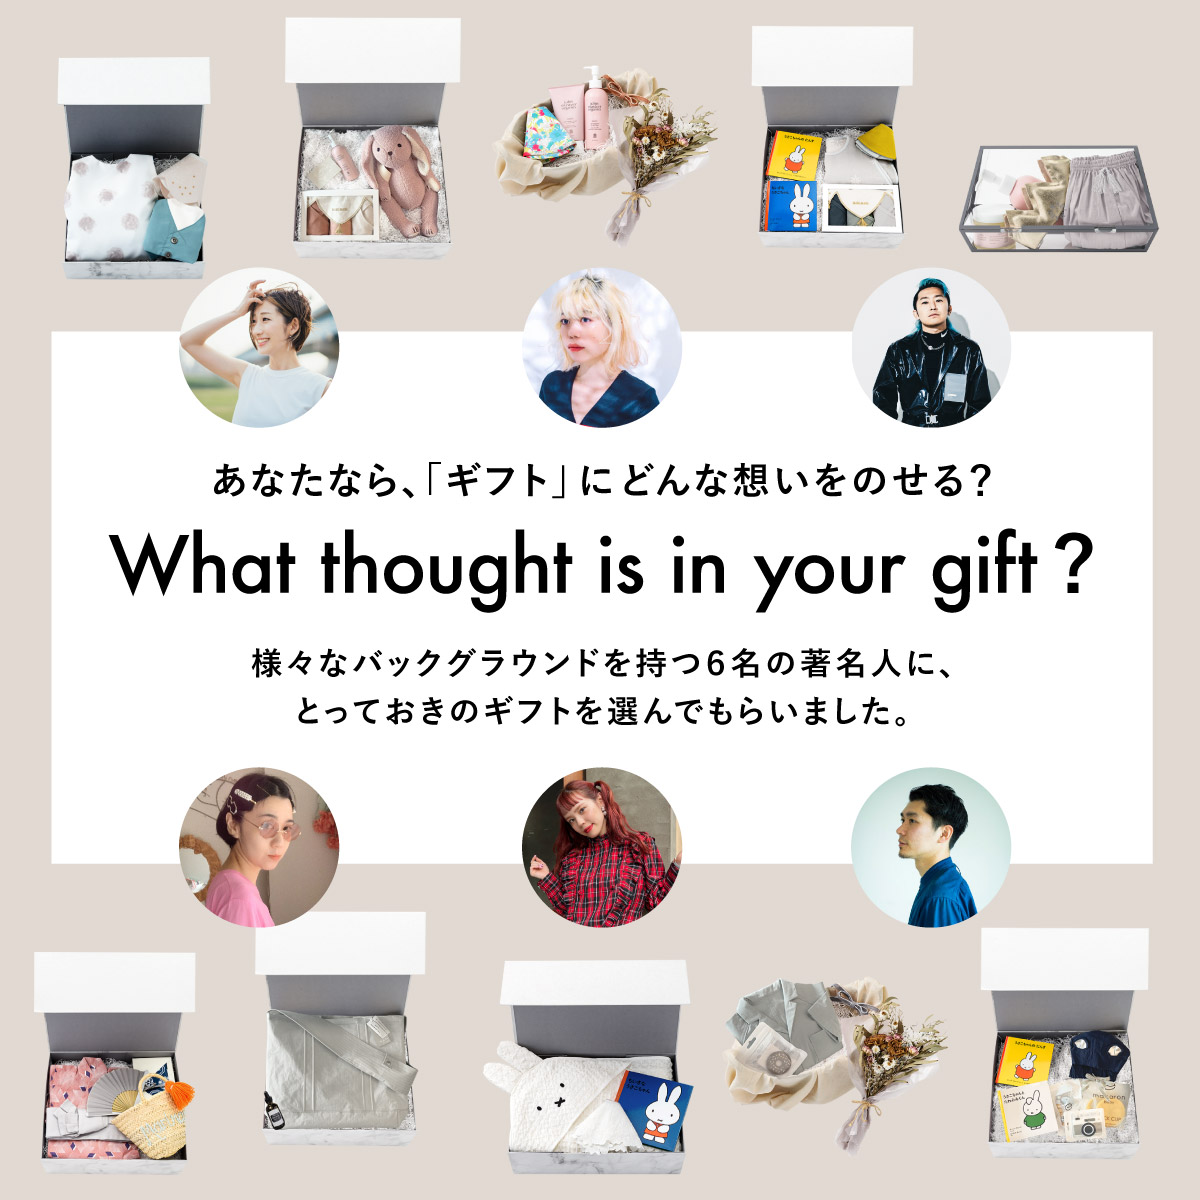 What thought is in your gift? あなたなら、「ギフト」にどんな想いをのせる？